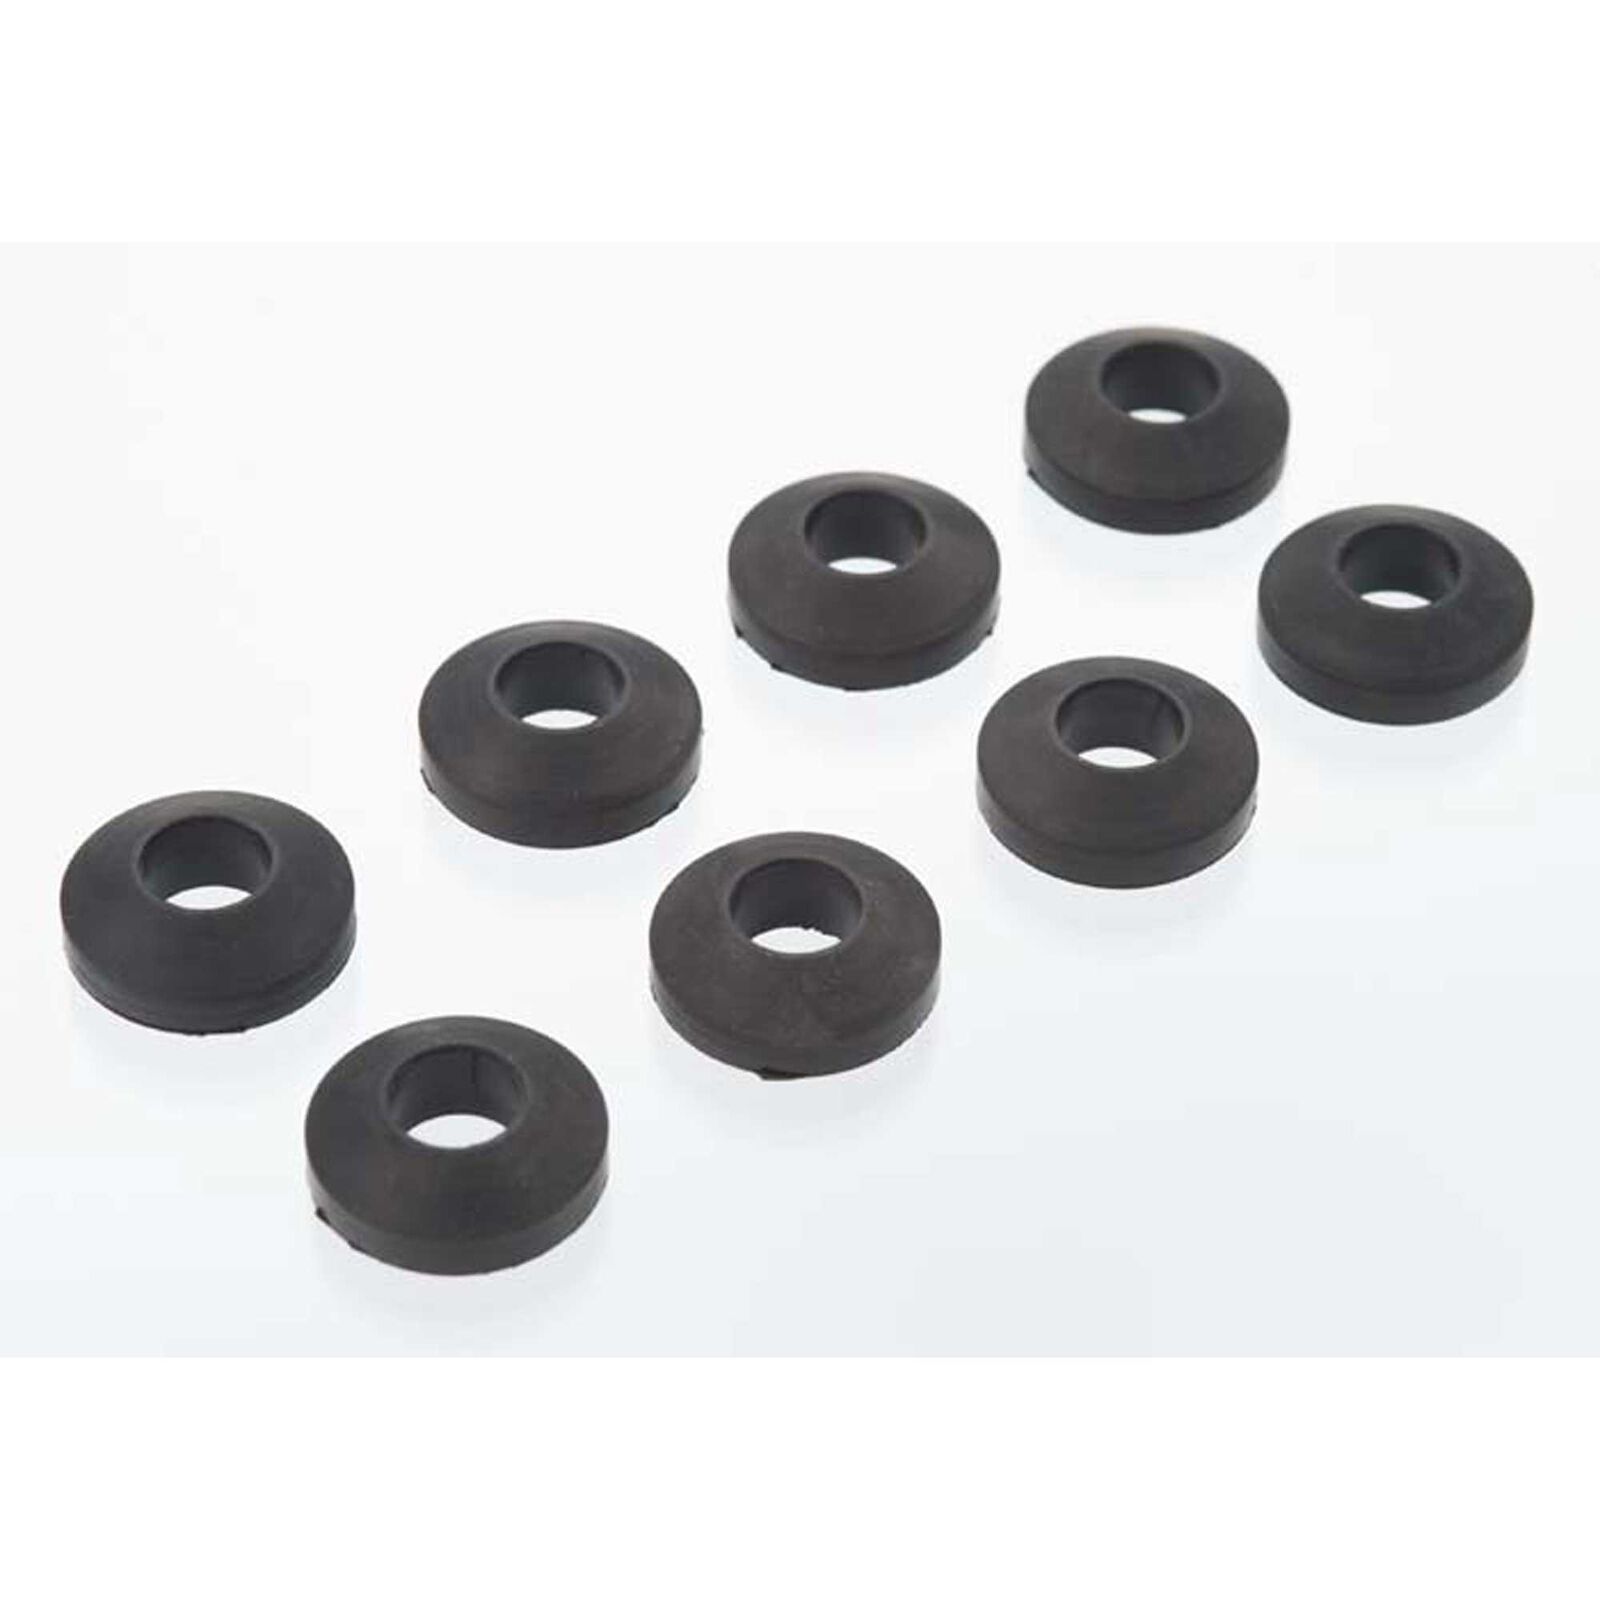 Damping Rubber: DLE-85